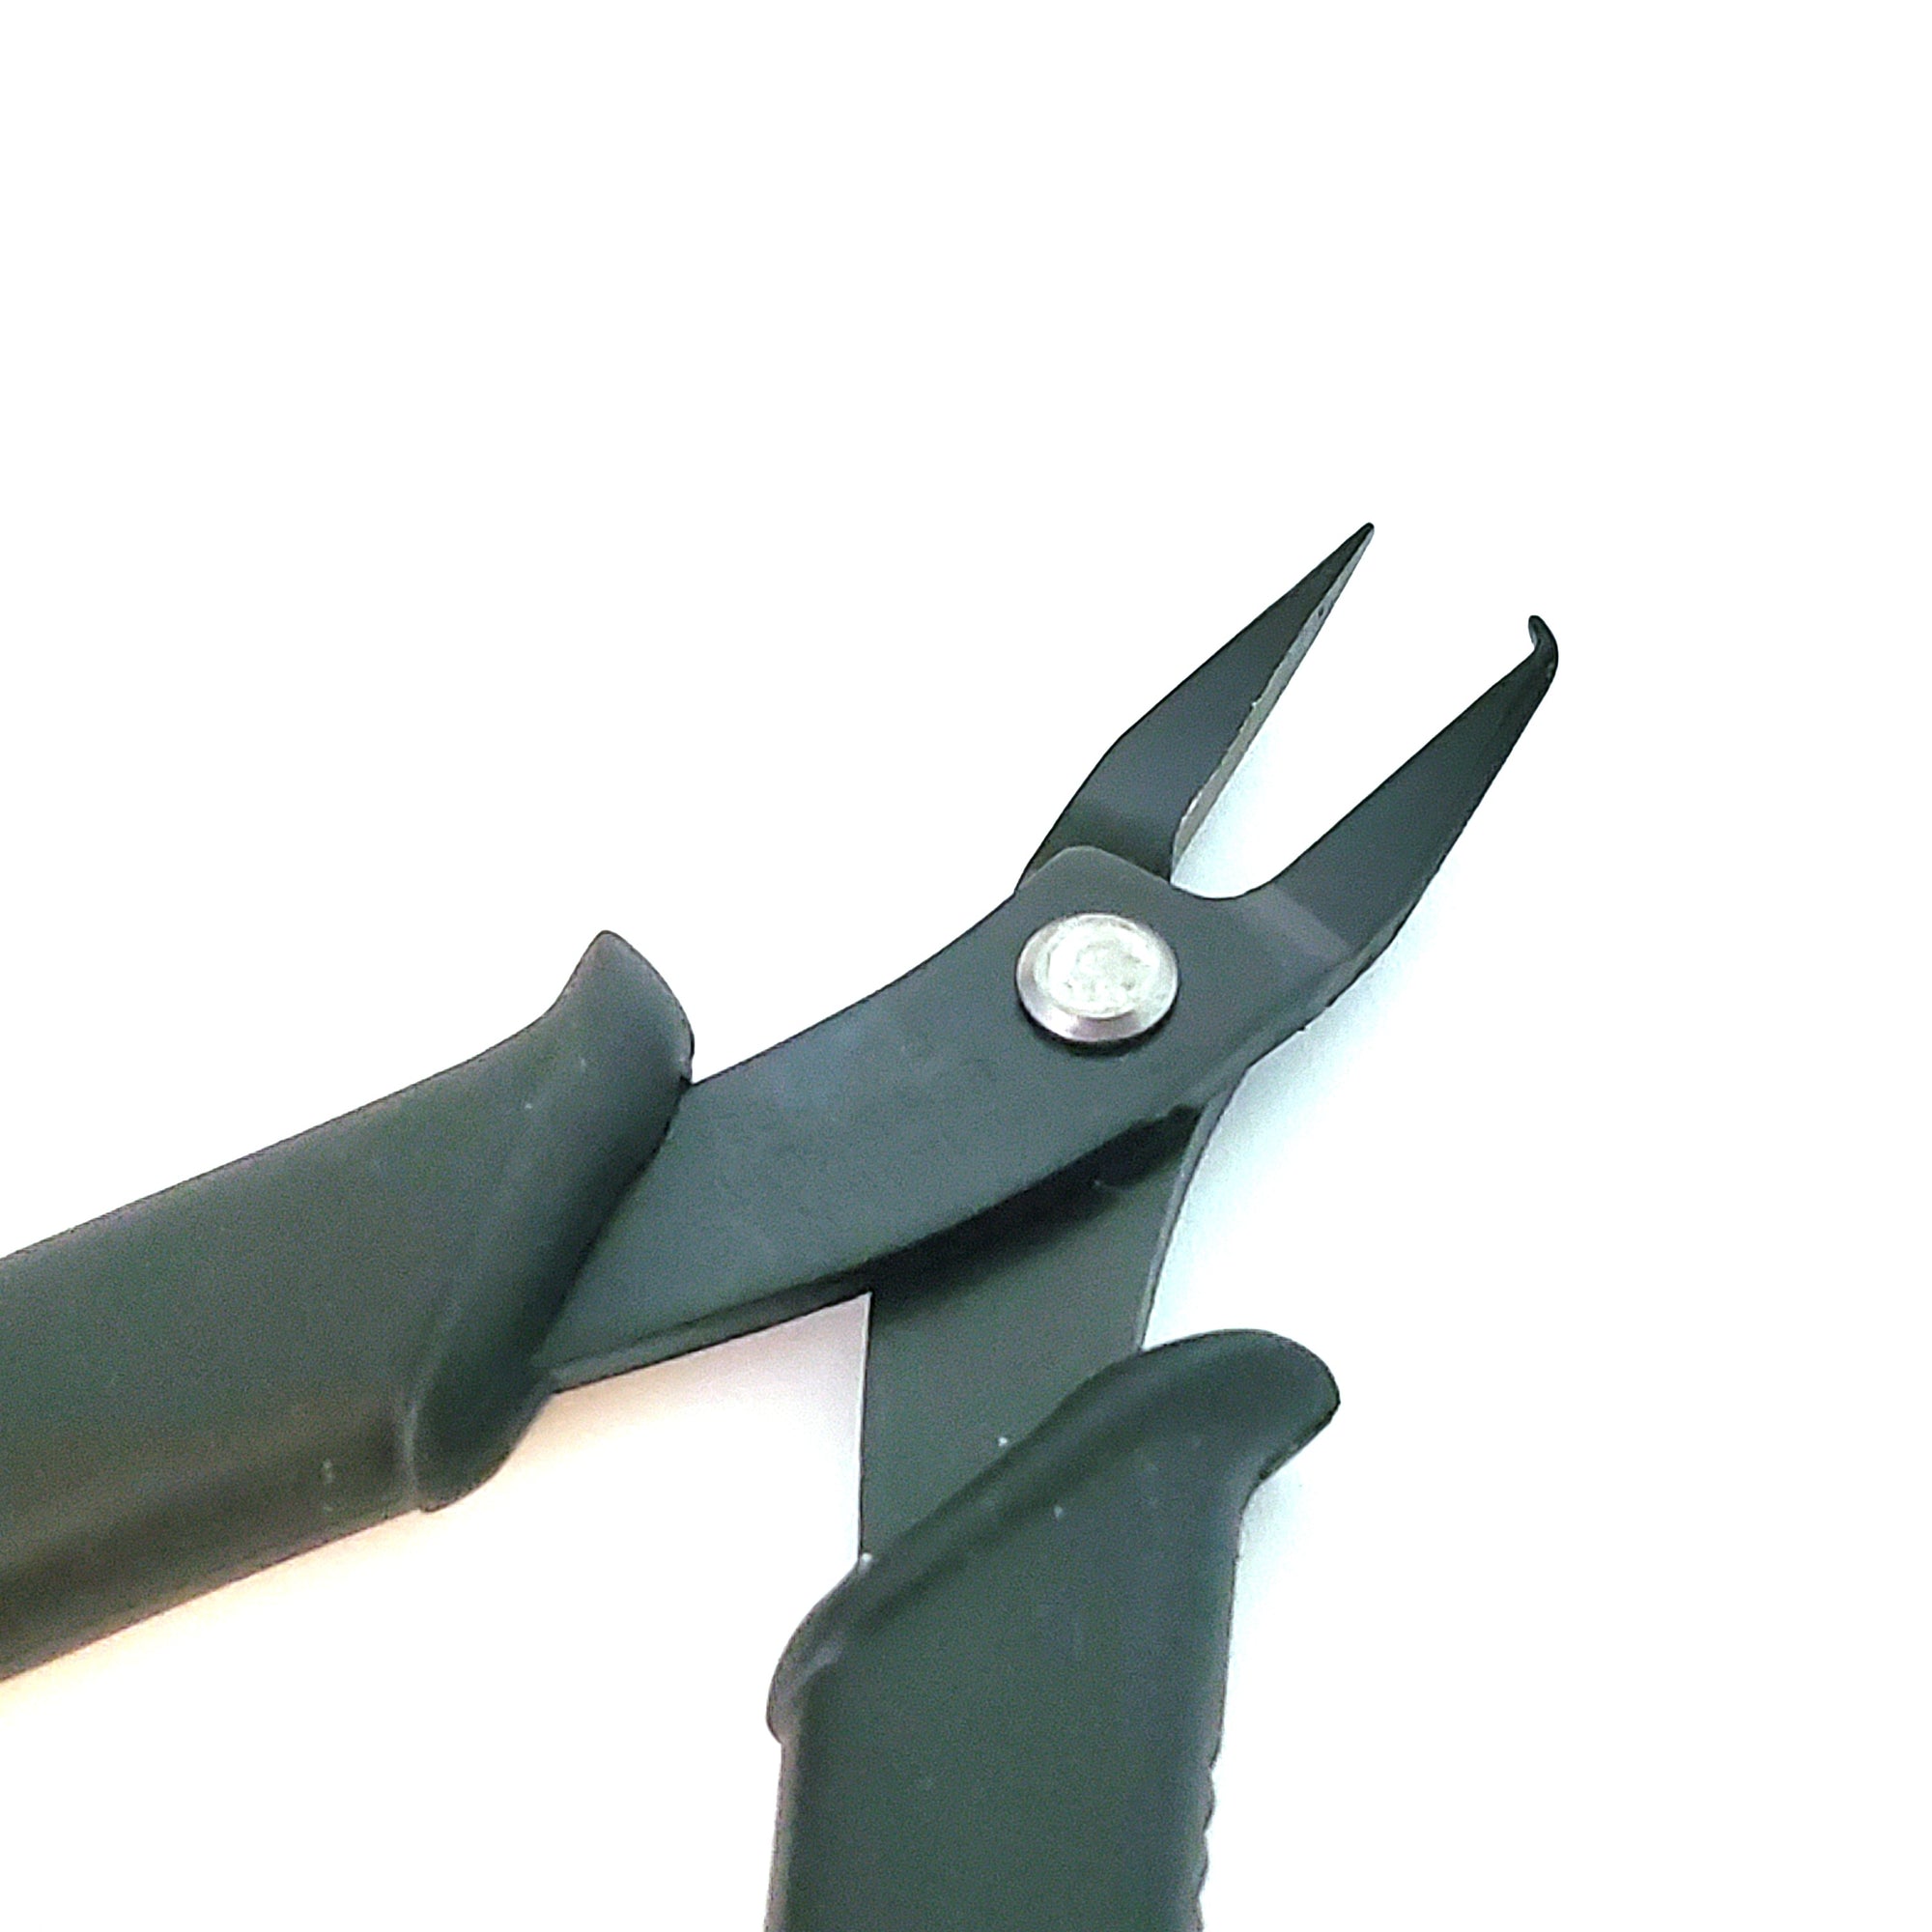 2 Pieces Jewelry Pliers, Jewelry Making Tools Split Ring Pliers and Jewelry  Bead Crimping Pliers Jewelry Making Pliers Tools for Jewelry Repair Wire  Wrapping Crafts Jewelry Making Supplies - Walmart.com